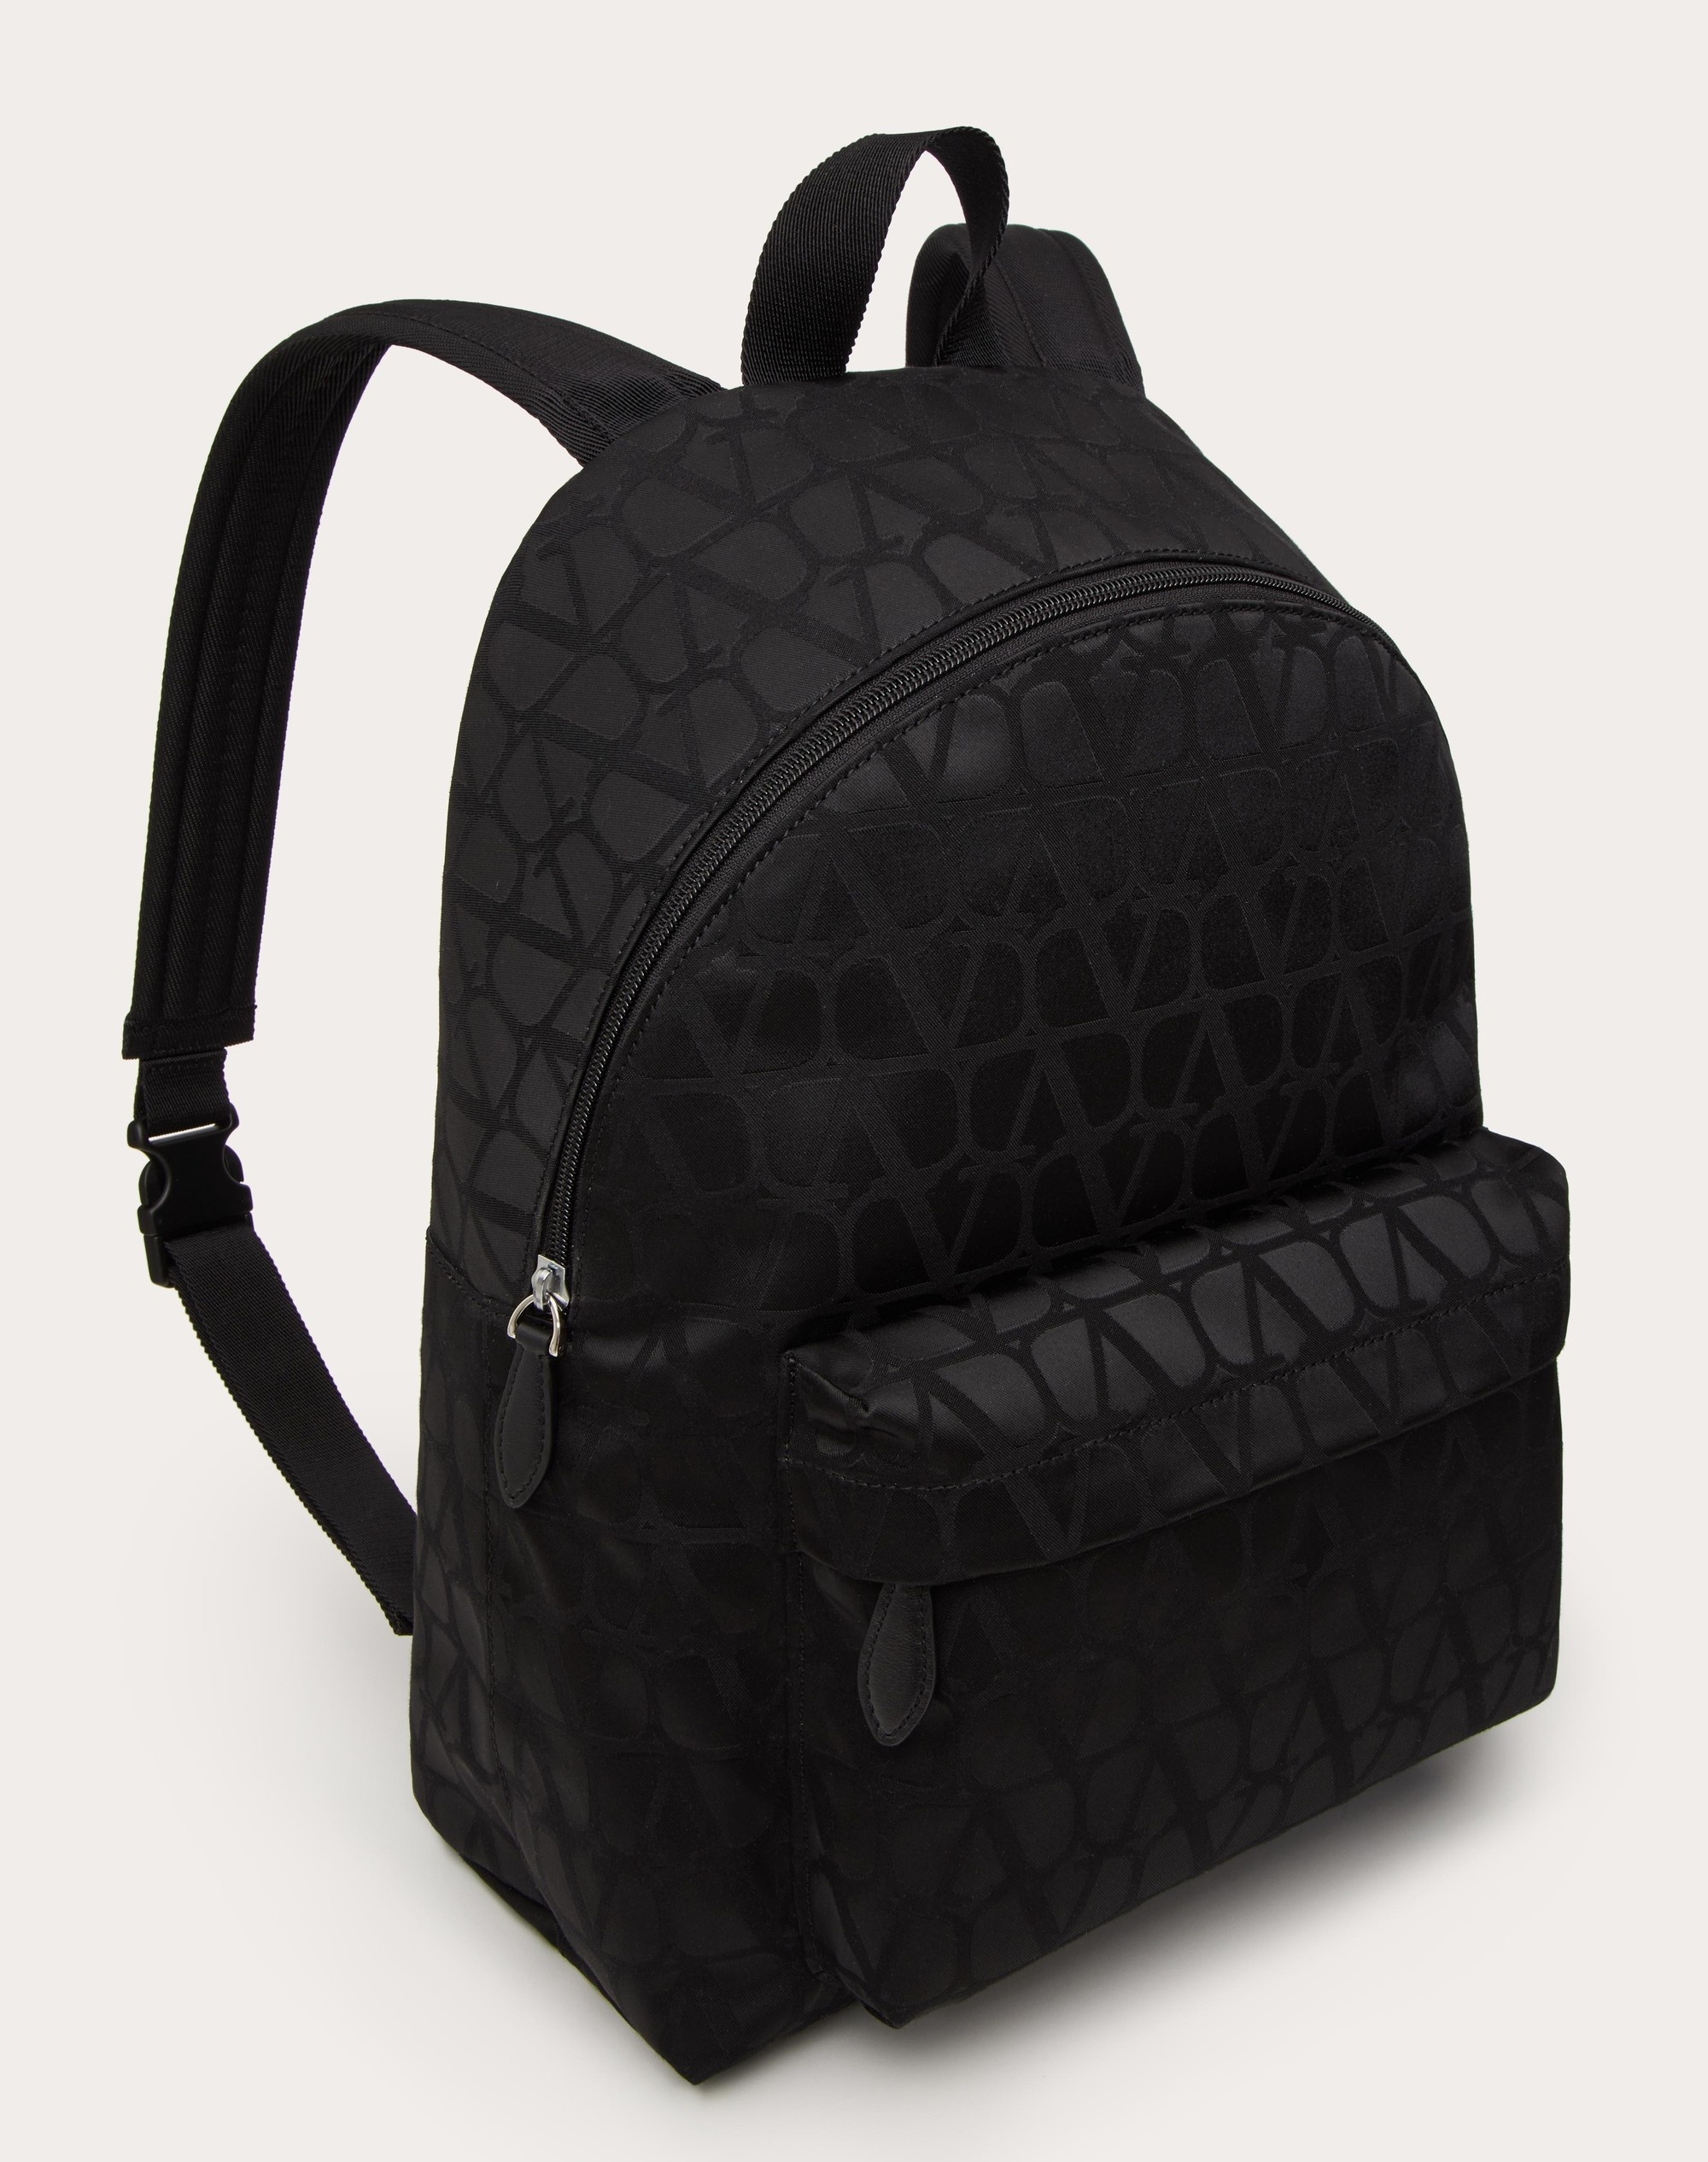 TOILE ICONOGRAPHE BACKPACK IN TECHNICAL FABRIC - 6